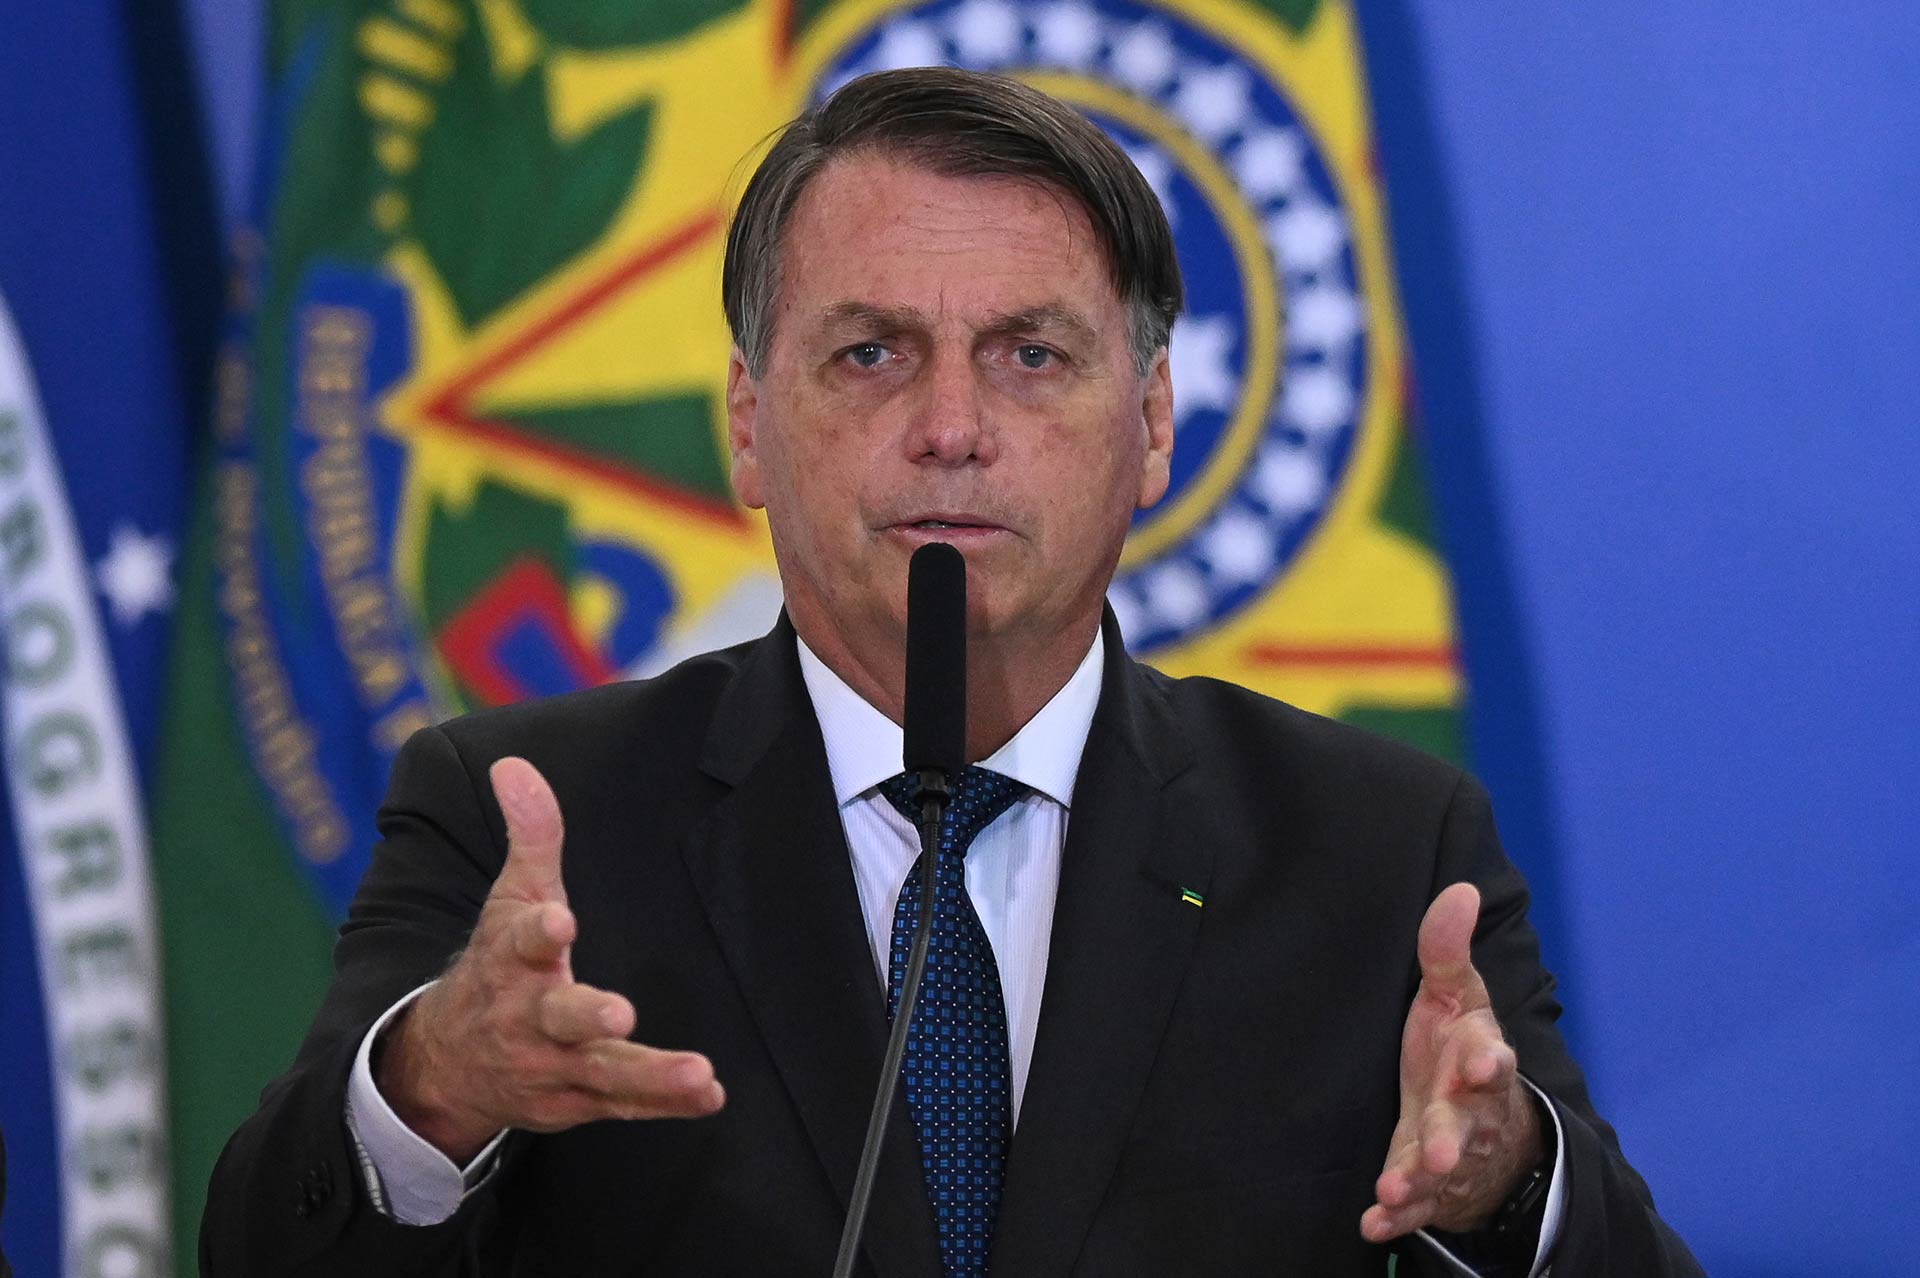 Jair Bolsonaro, President of Brazil, has been named the Organized Crime and Corruption Reporting Project’s (OCCRP) 2020 Person of the Year for his role in promoting organized crime and corruption.